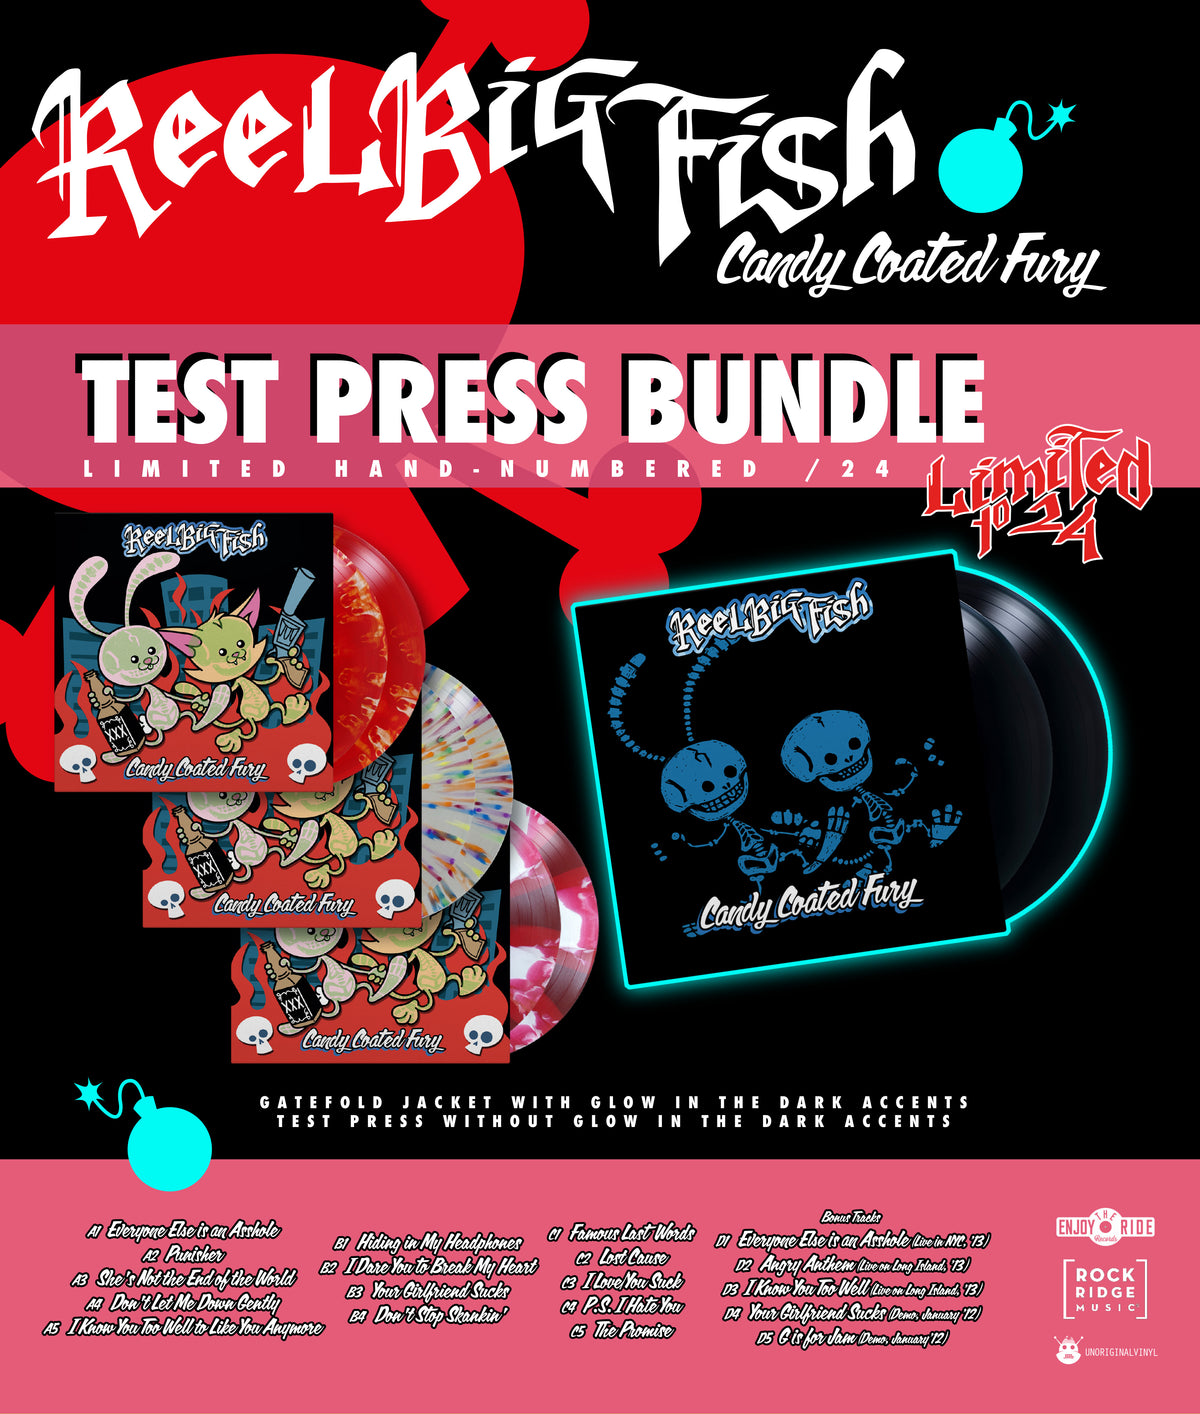 Reel Big Fish- Candy Coated Fury [Deluxe Edition] (ETR182)